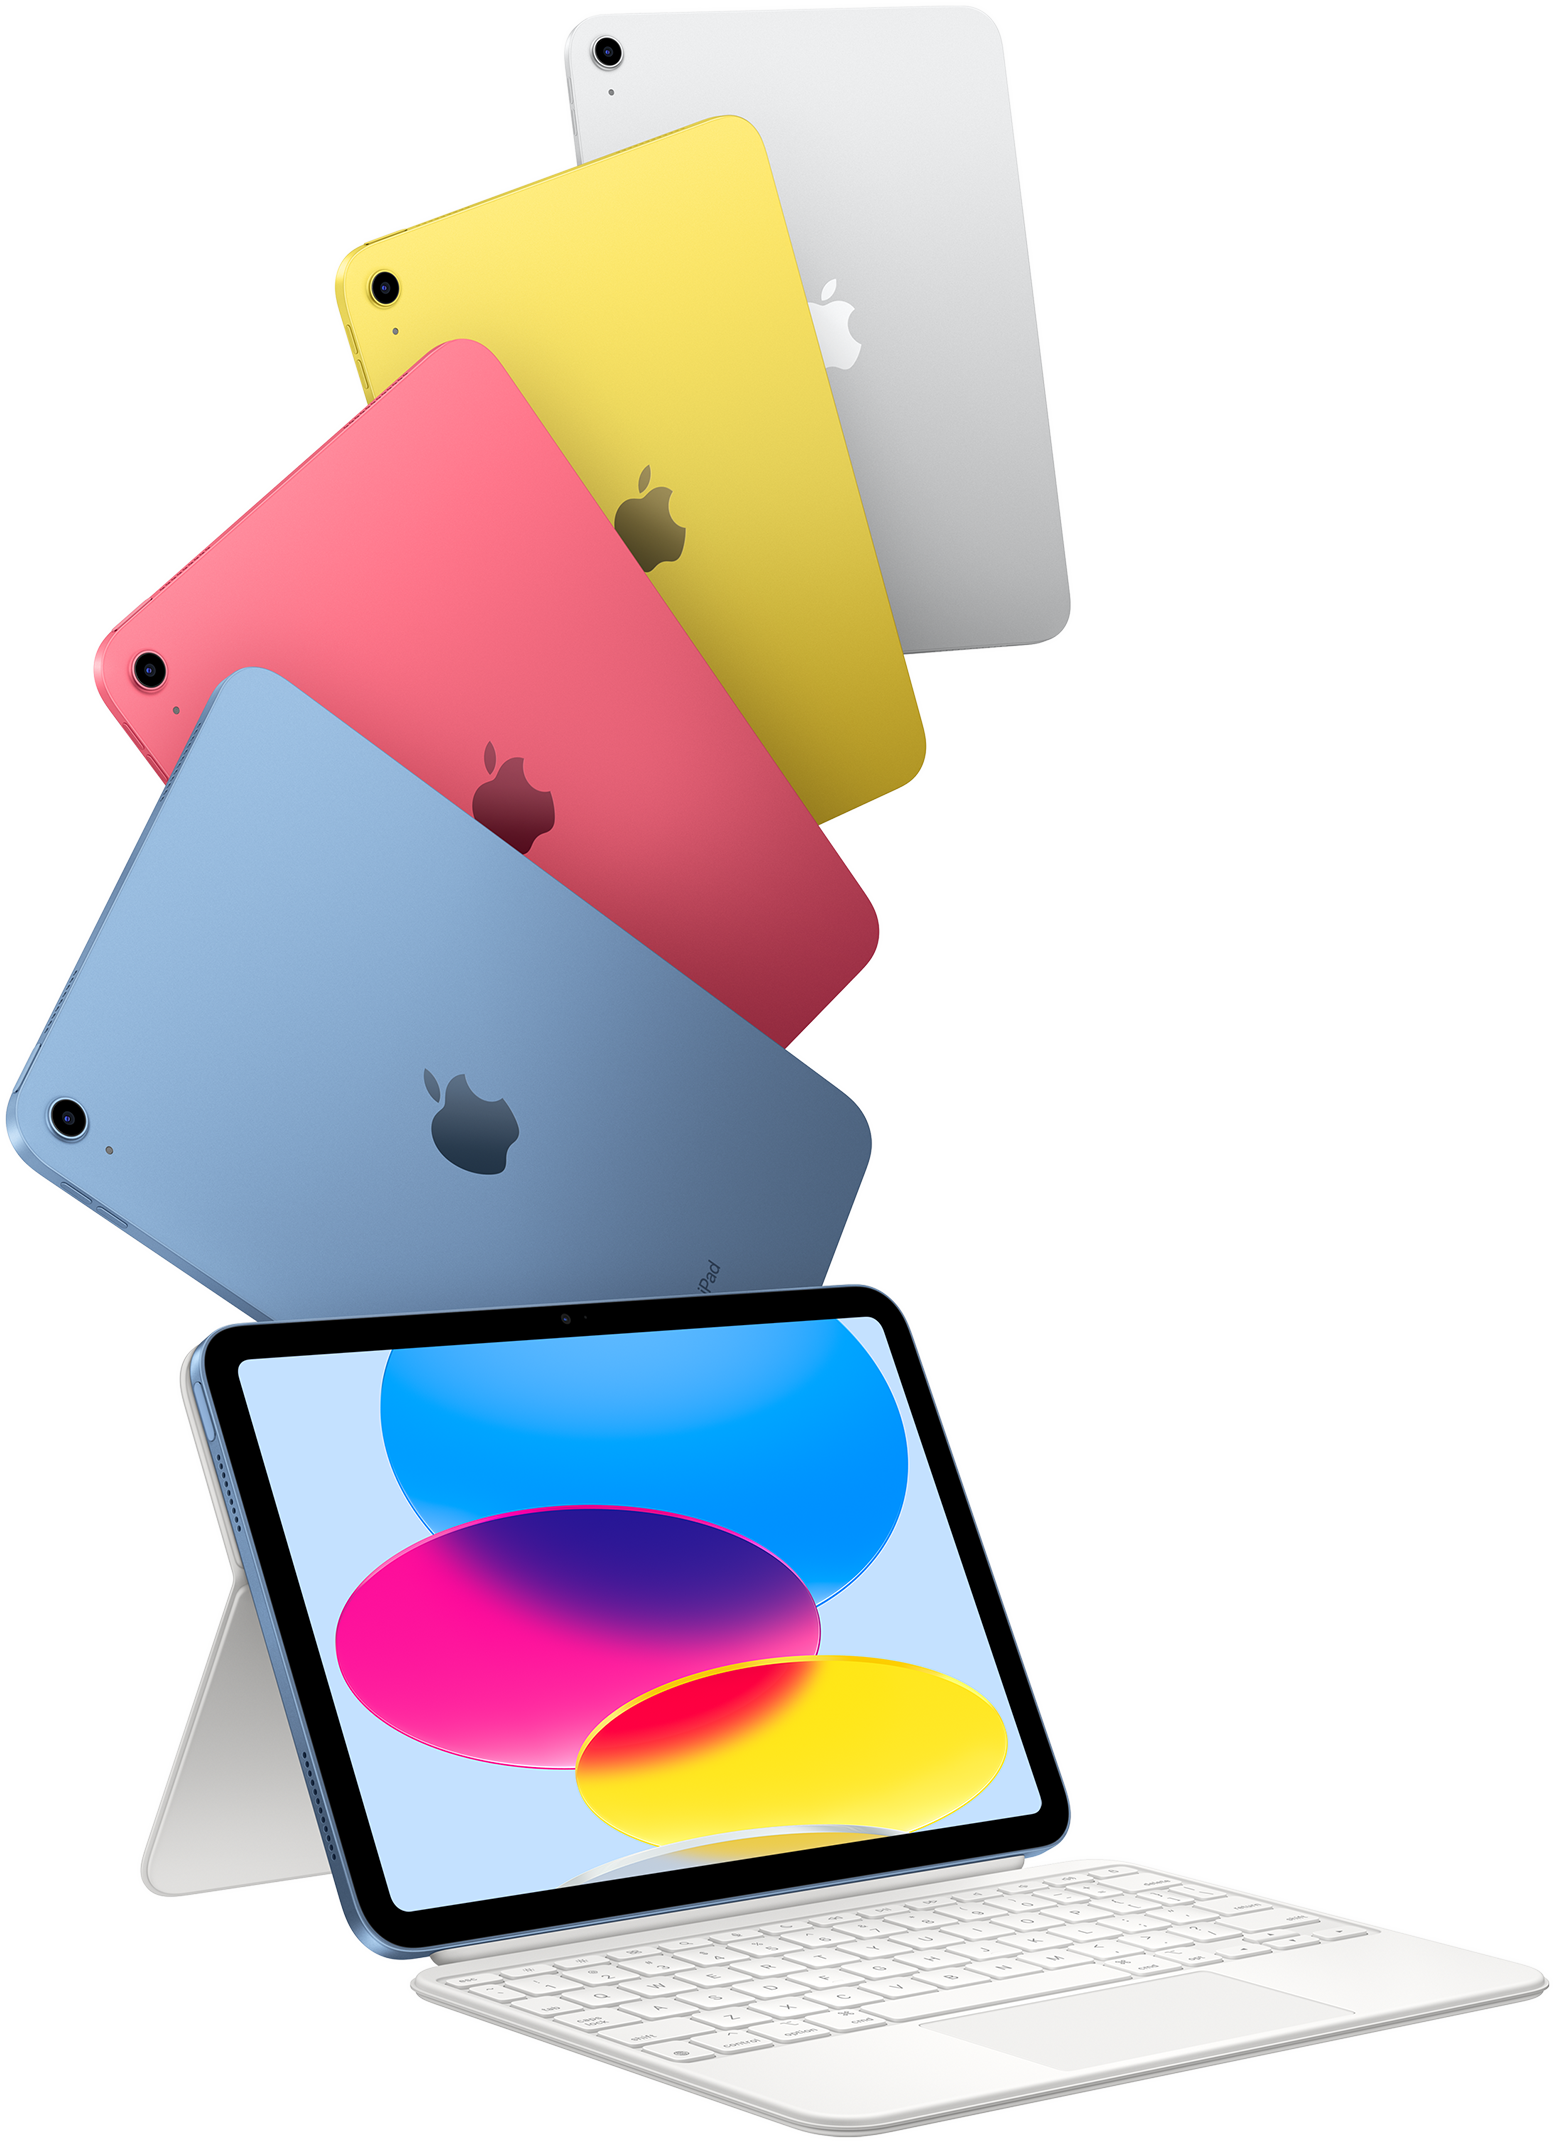 iPad in blue, pink, yellow and silver colours, and one iPad attached to the Magic Keyboard Folio.